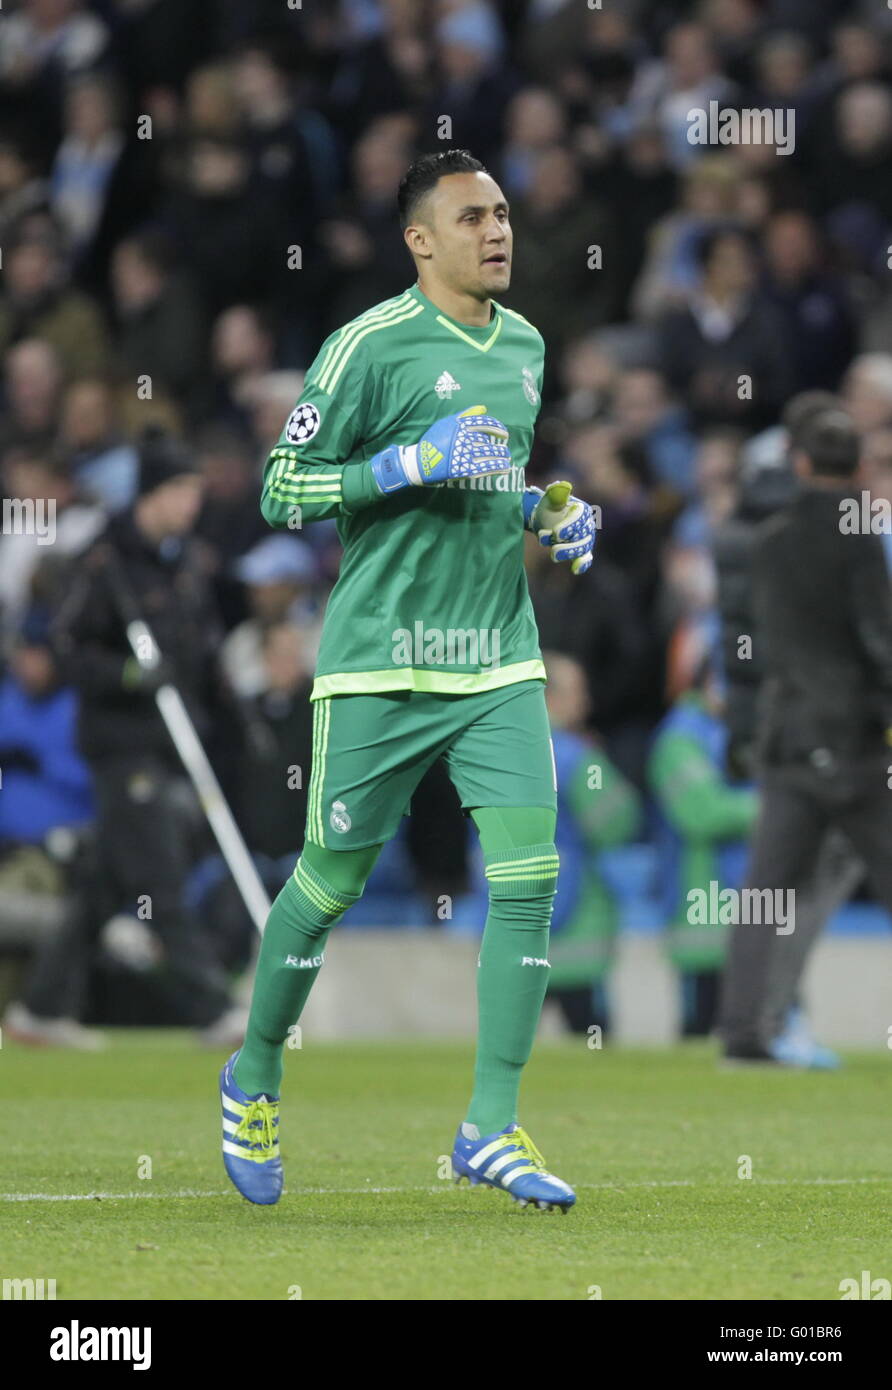 Keylor navas of real madrid in action during the match of champions league manchester city